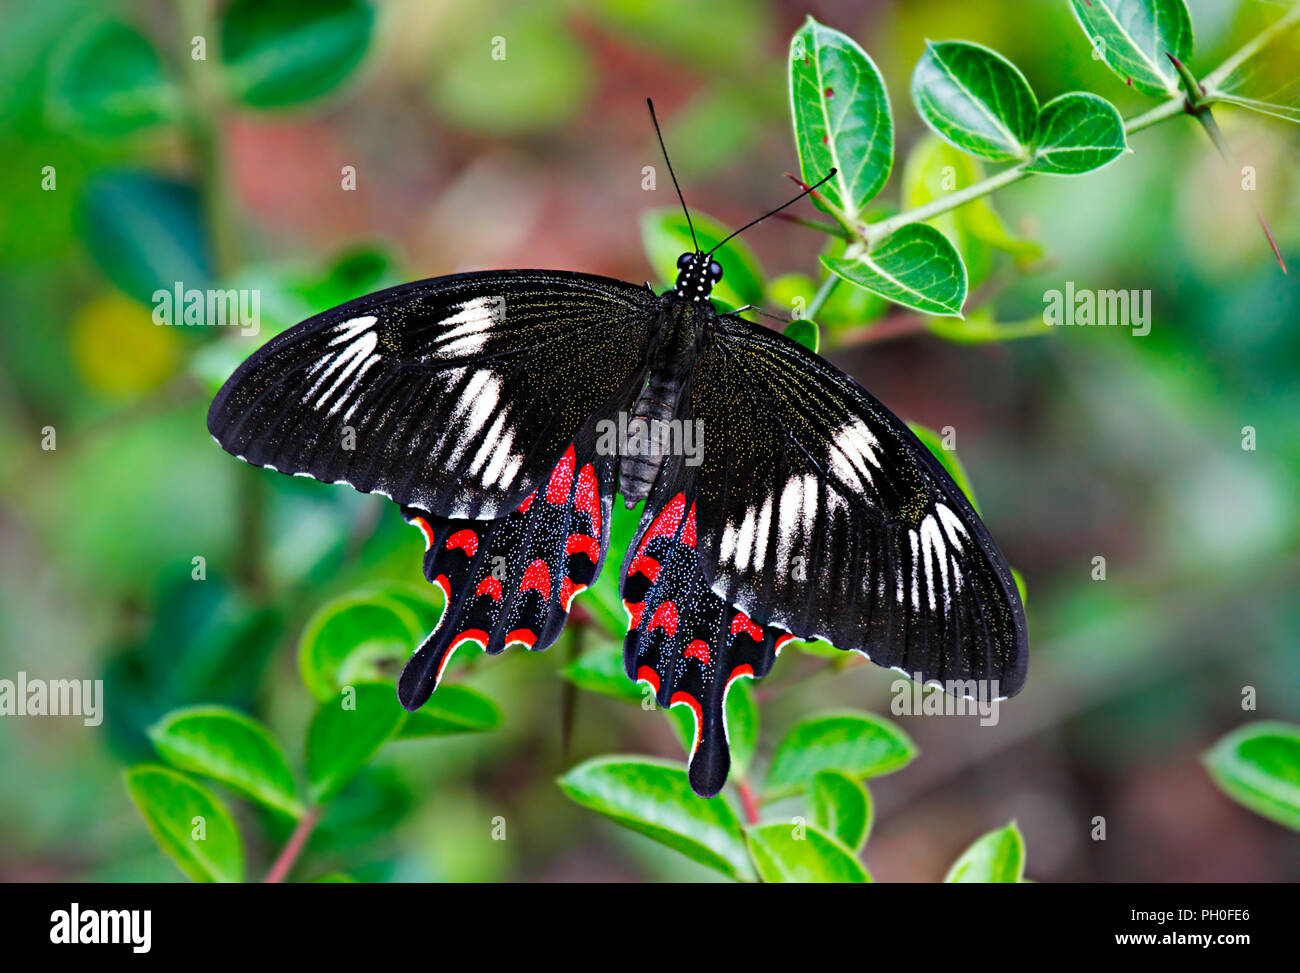 Black butterfly Pachliopta hector or Crimson Rose butterfly on green background. India. Stock Photo